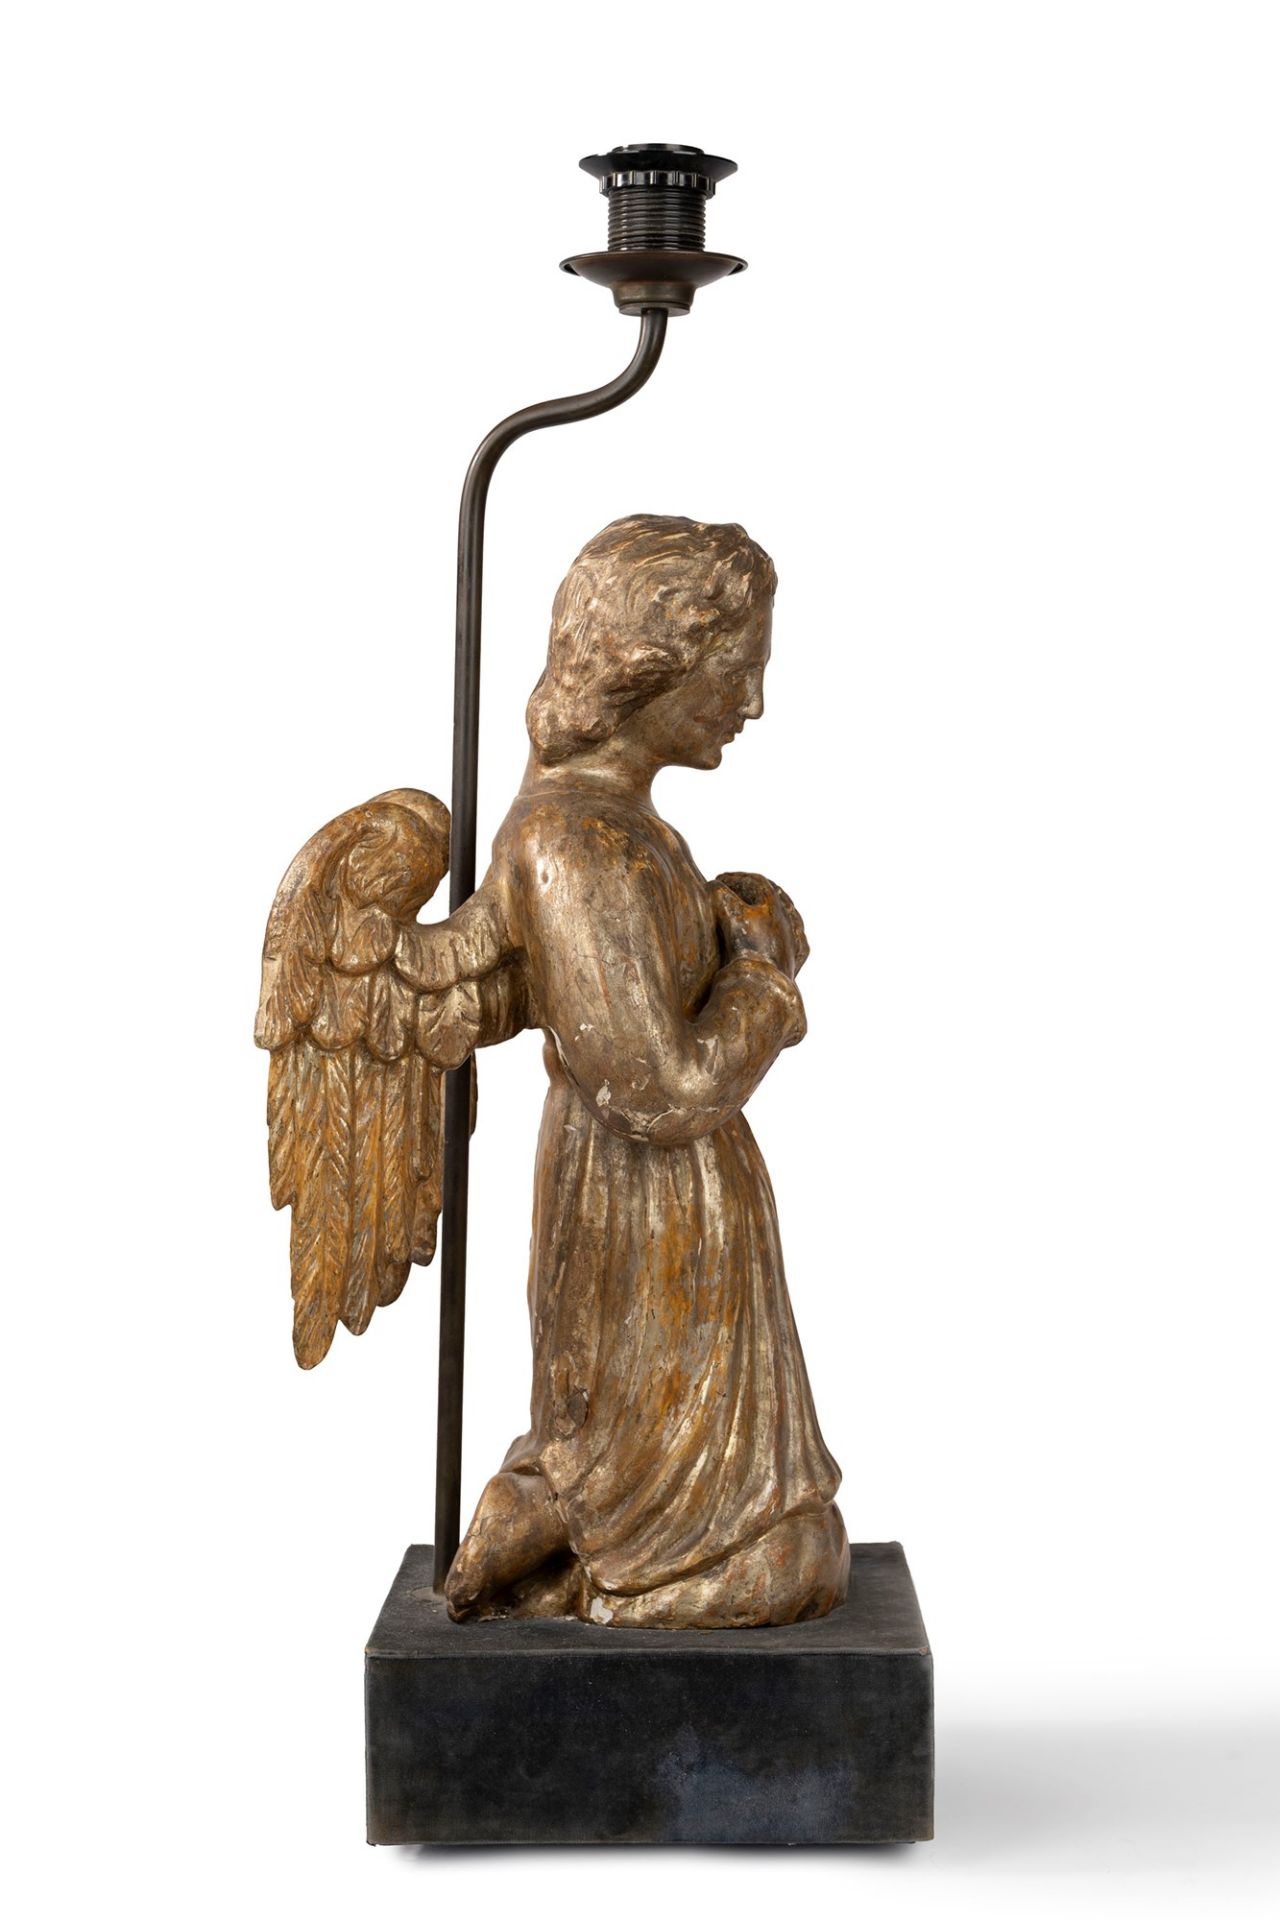 Praying angel in mecca-gilded wood mounted on a lamp, 18th-19th centuries - Image 3 of 3